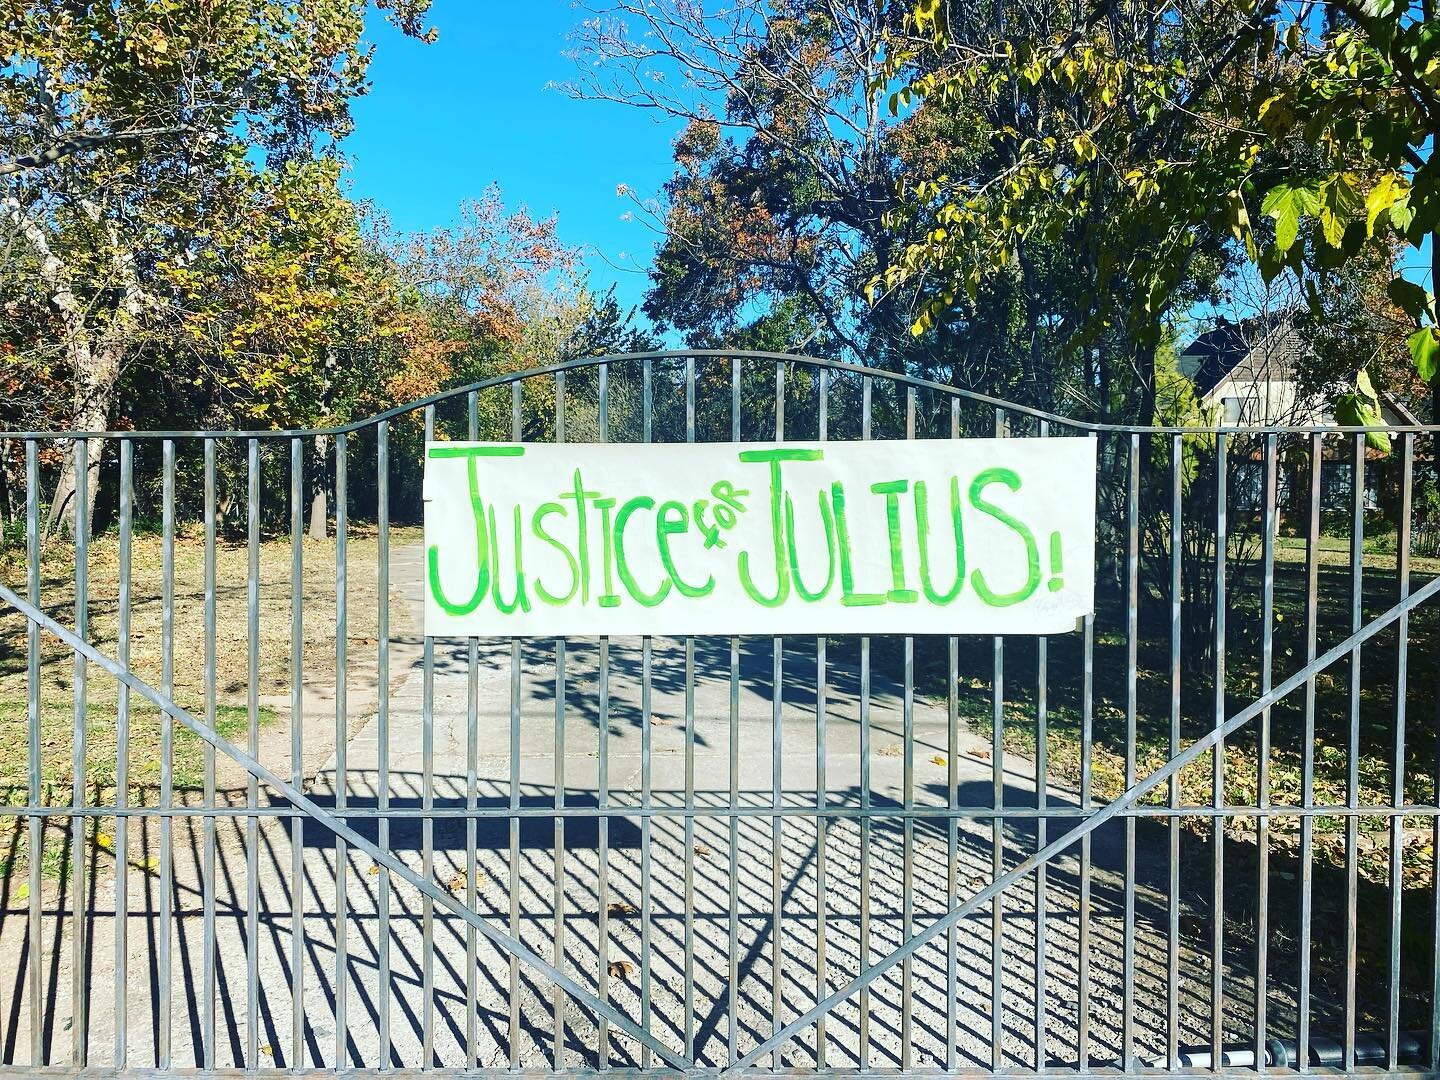 The Stone Barn stands with @justiceforjulius asking @govkevinstitt to do the right thing and grant clemency and spare an innocent life. #justiceforjulius